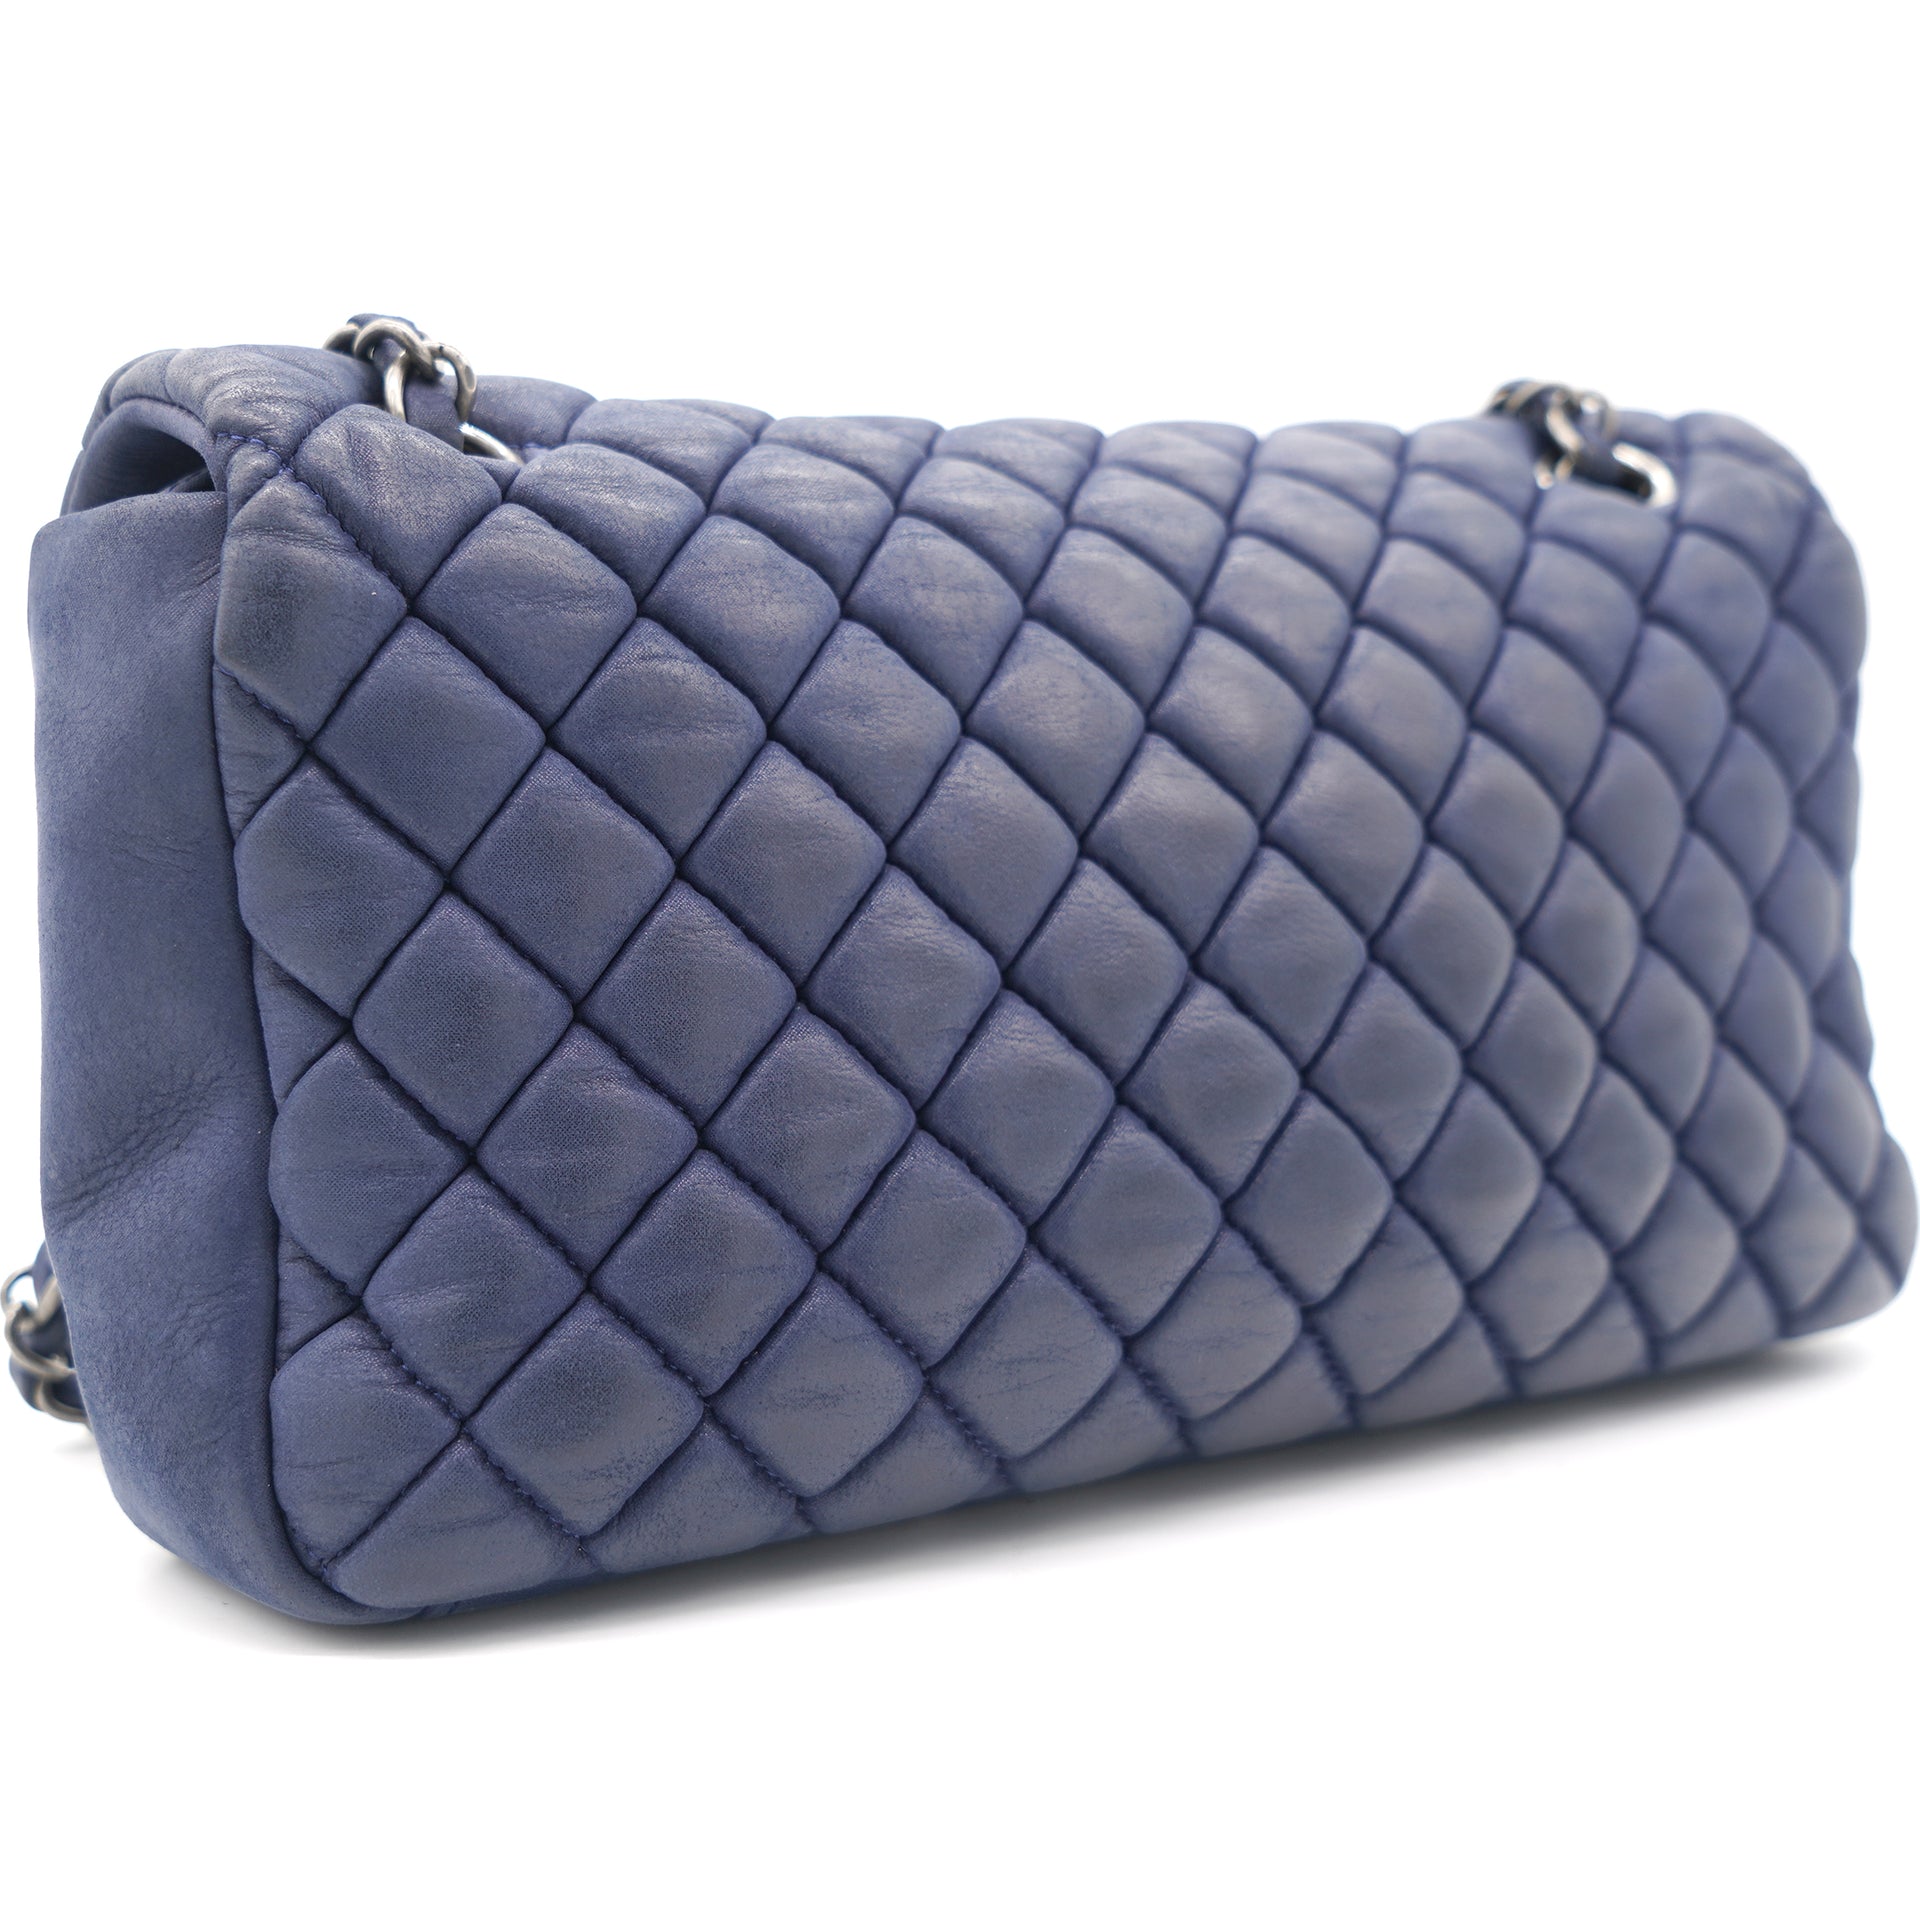 Chanel Dark Blue Quilted Caviar Leather Easy Flap Bag Chanel